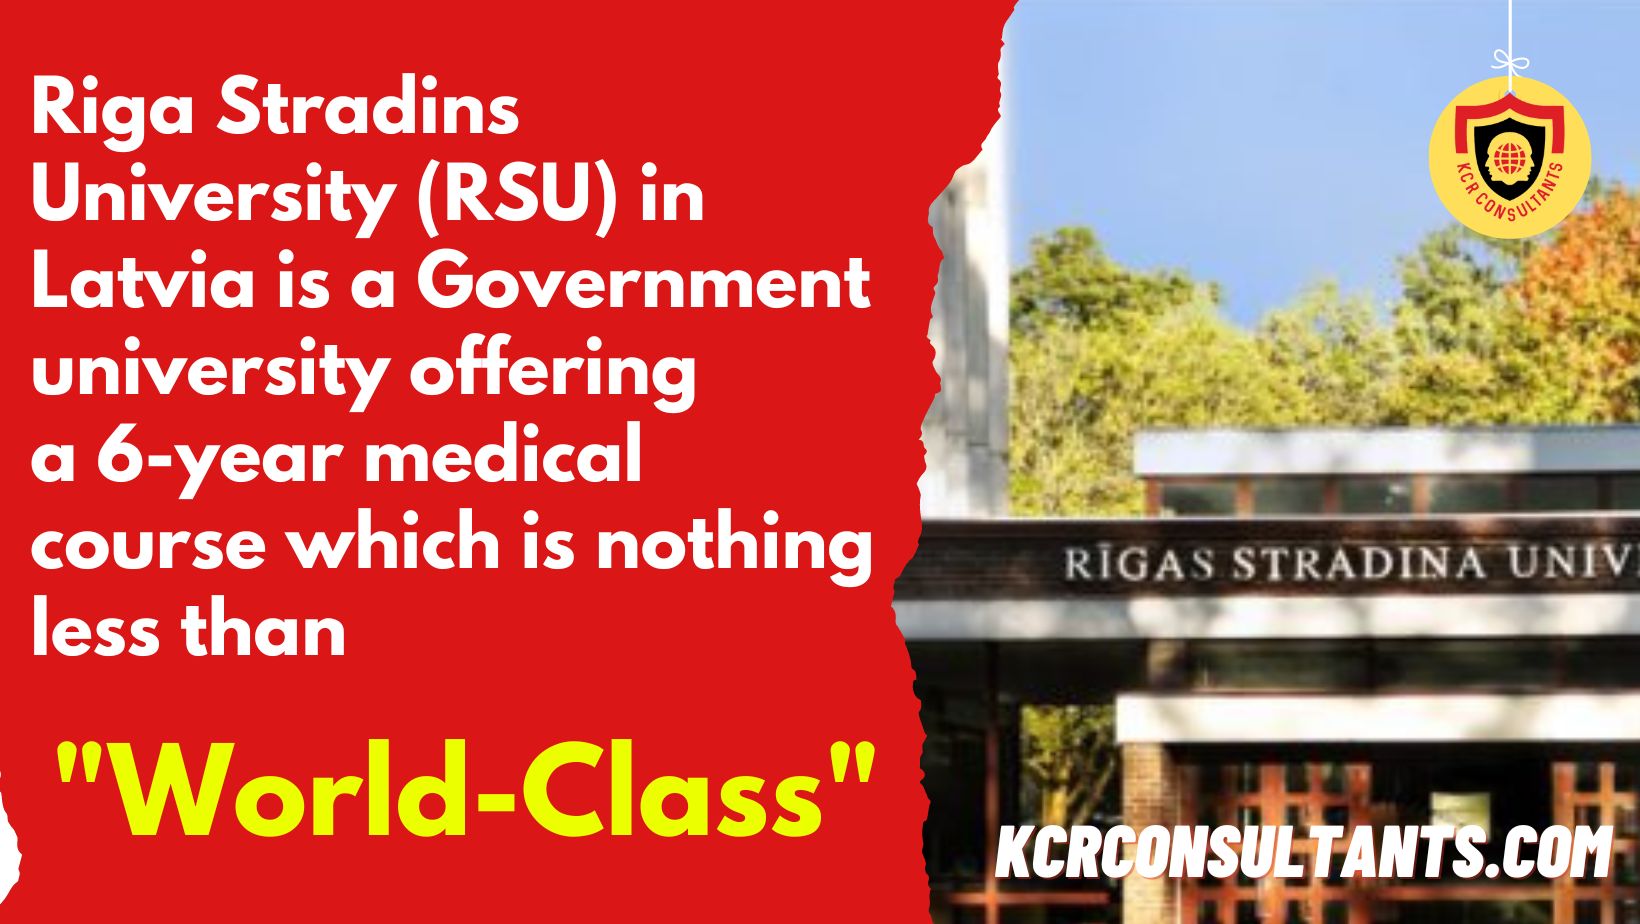 Riga Stradins university (RSU) in Latvia is a Government university offering a 6-year medical course which is nothing less than world-class